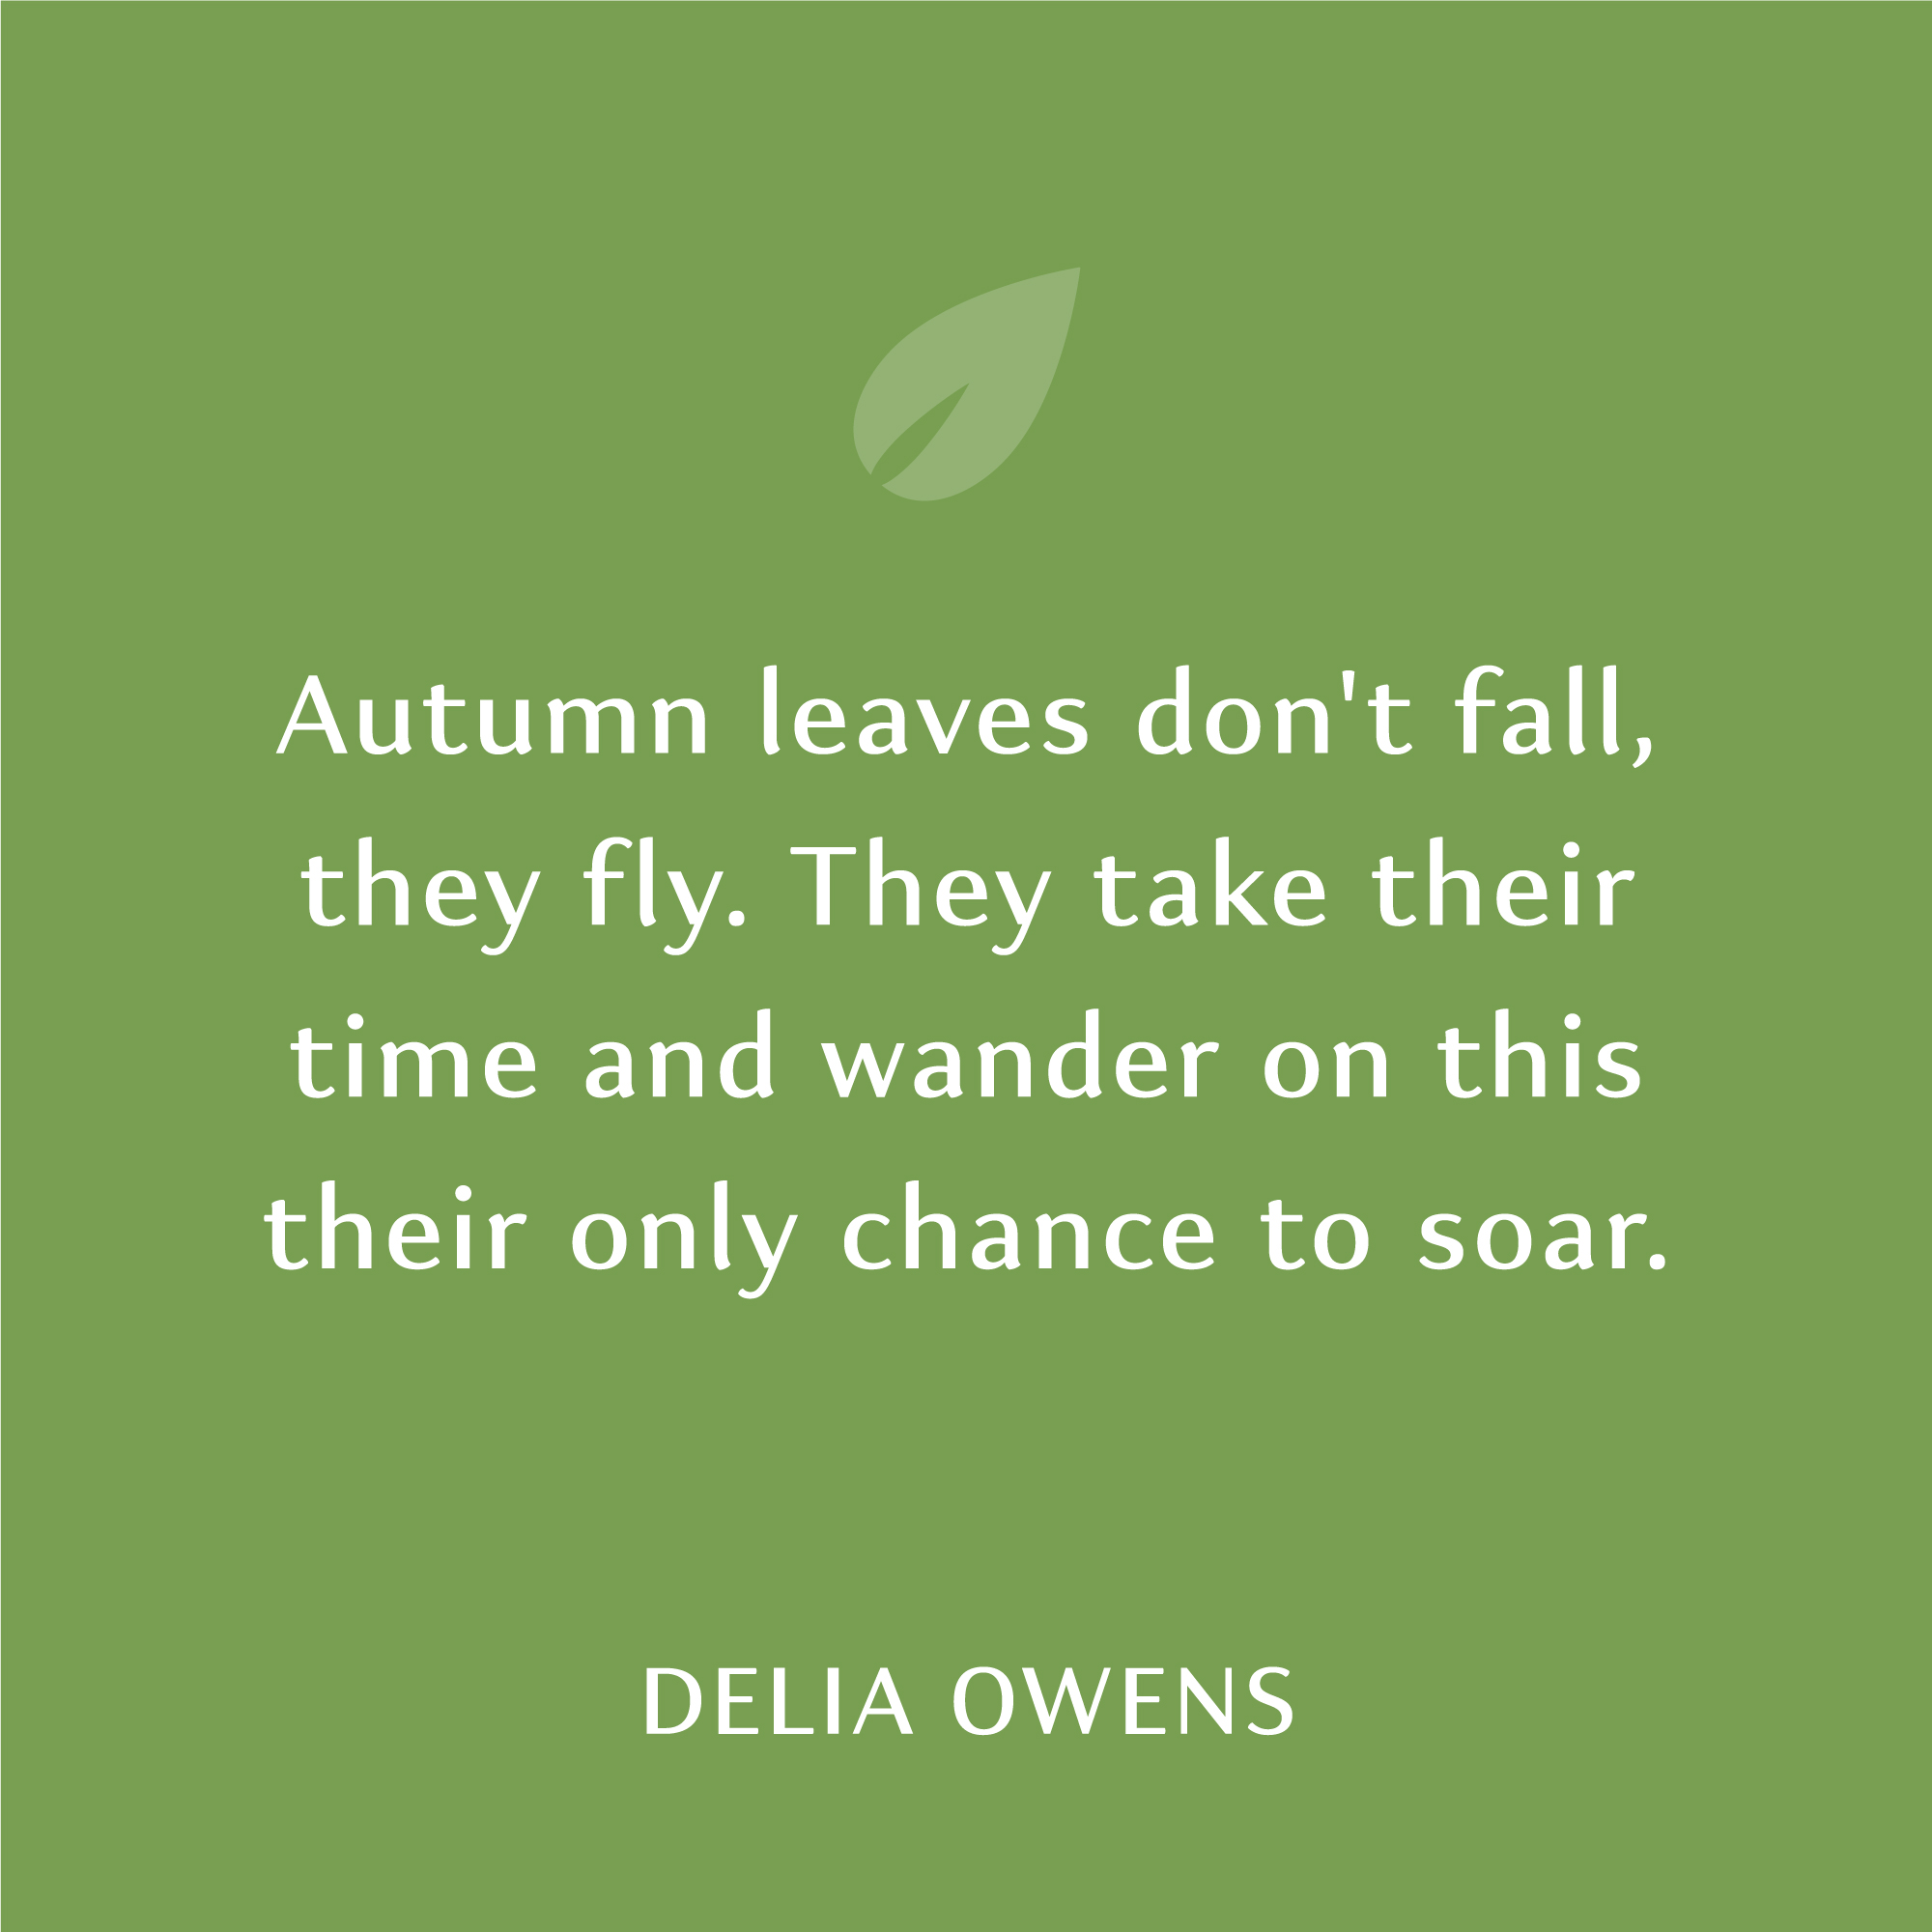 Autumn leaves don't fall, they fly